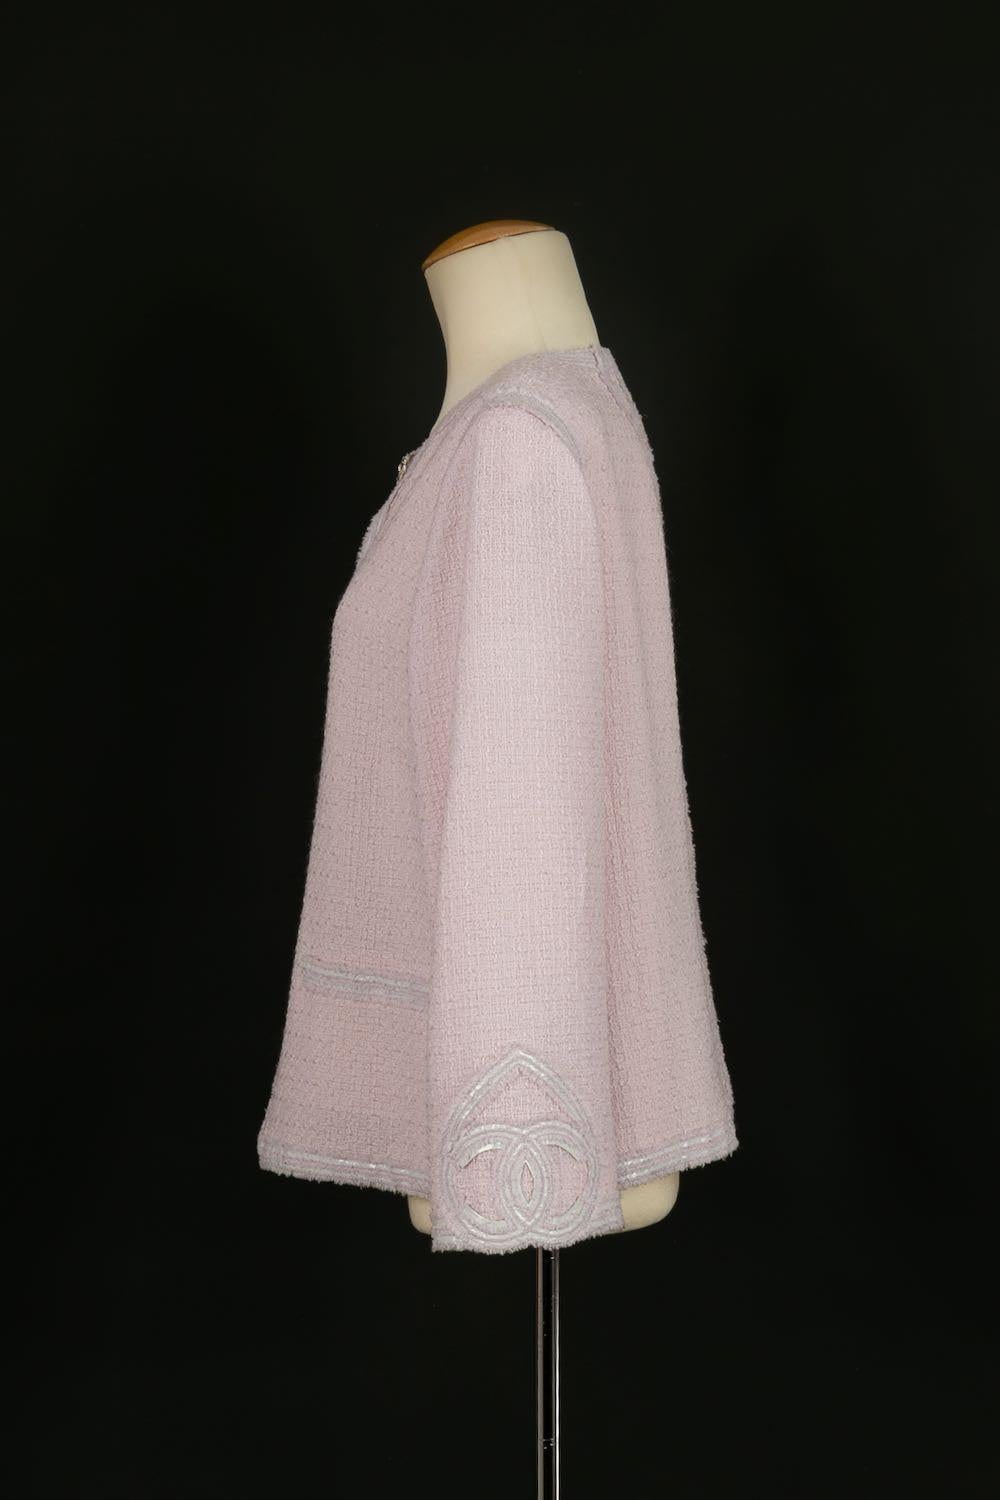 Chanel - (Made in France) Wool jacket in shades of pink, silk lining. Cruise Collection 2009. Size 48FR.

Additional information: 
Dimensions: Shoulder width: 42 cm, Sleeve length: 54 cm, Length: 60 cm
Condition: Very good condition
Seller Ref